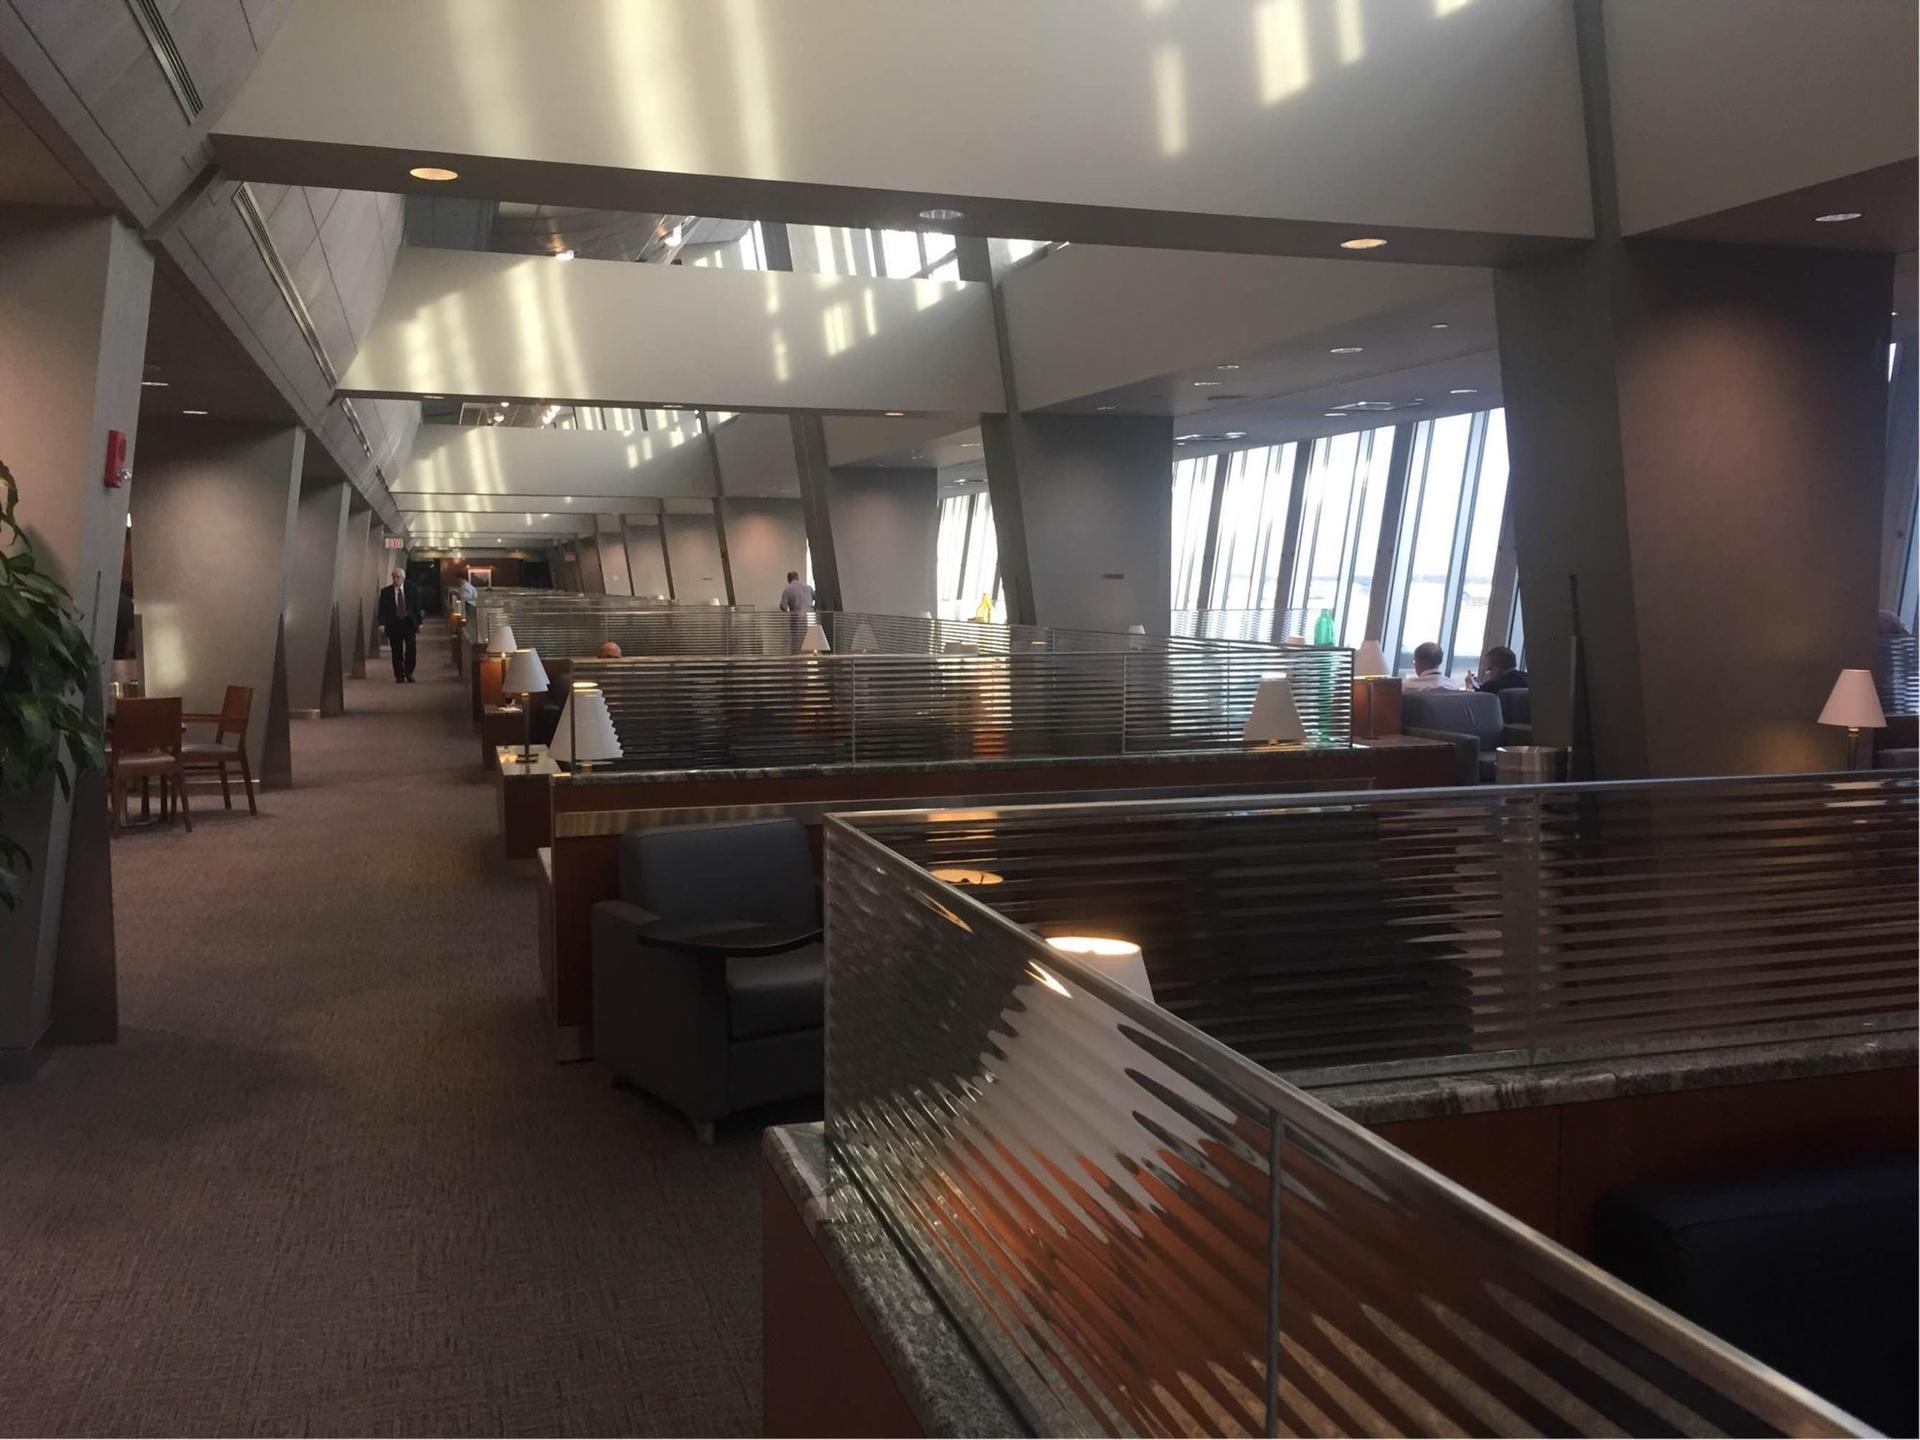 American Airlines Admirals Club image 18 of 48